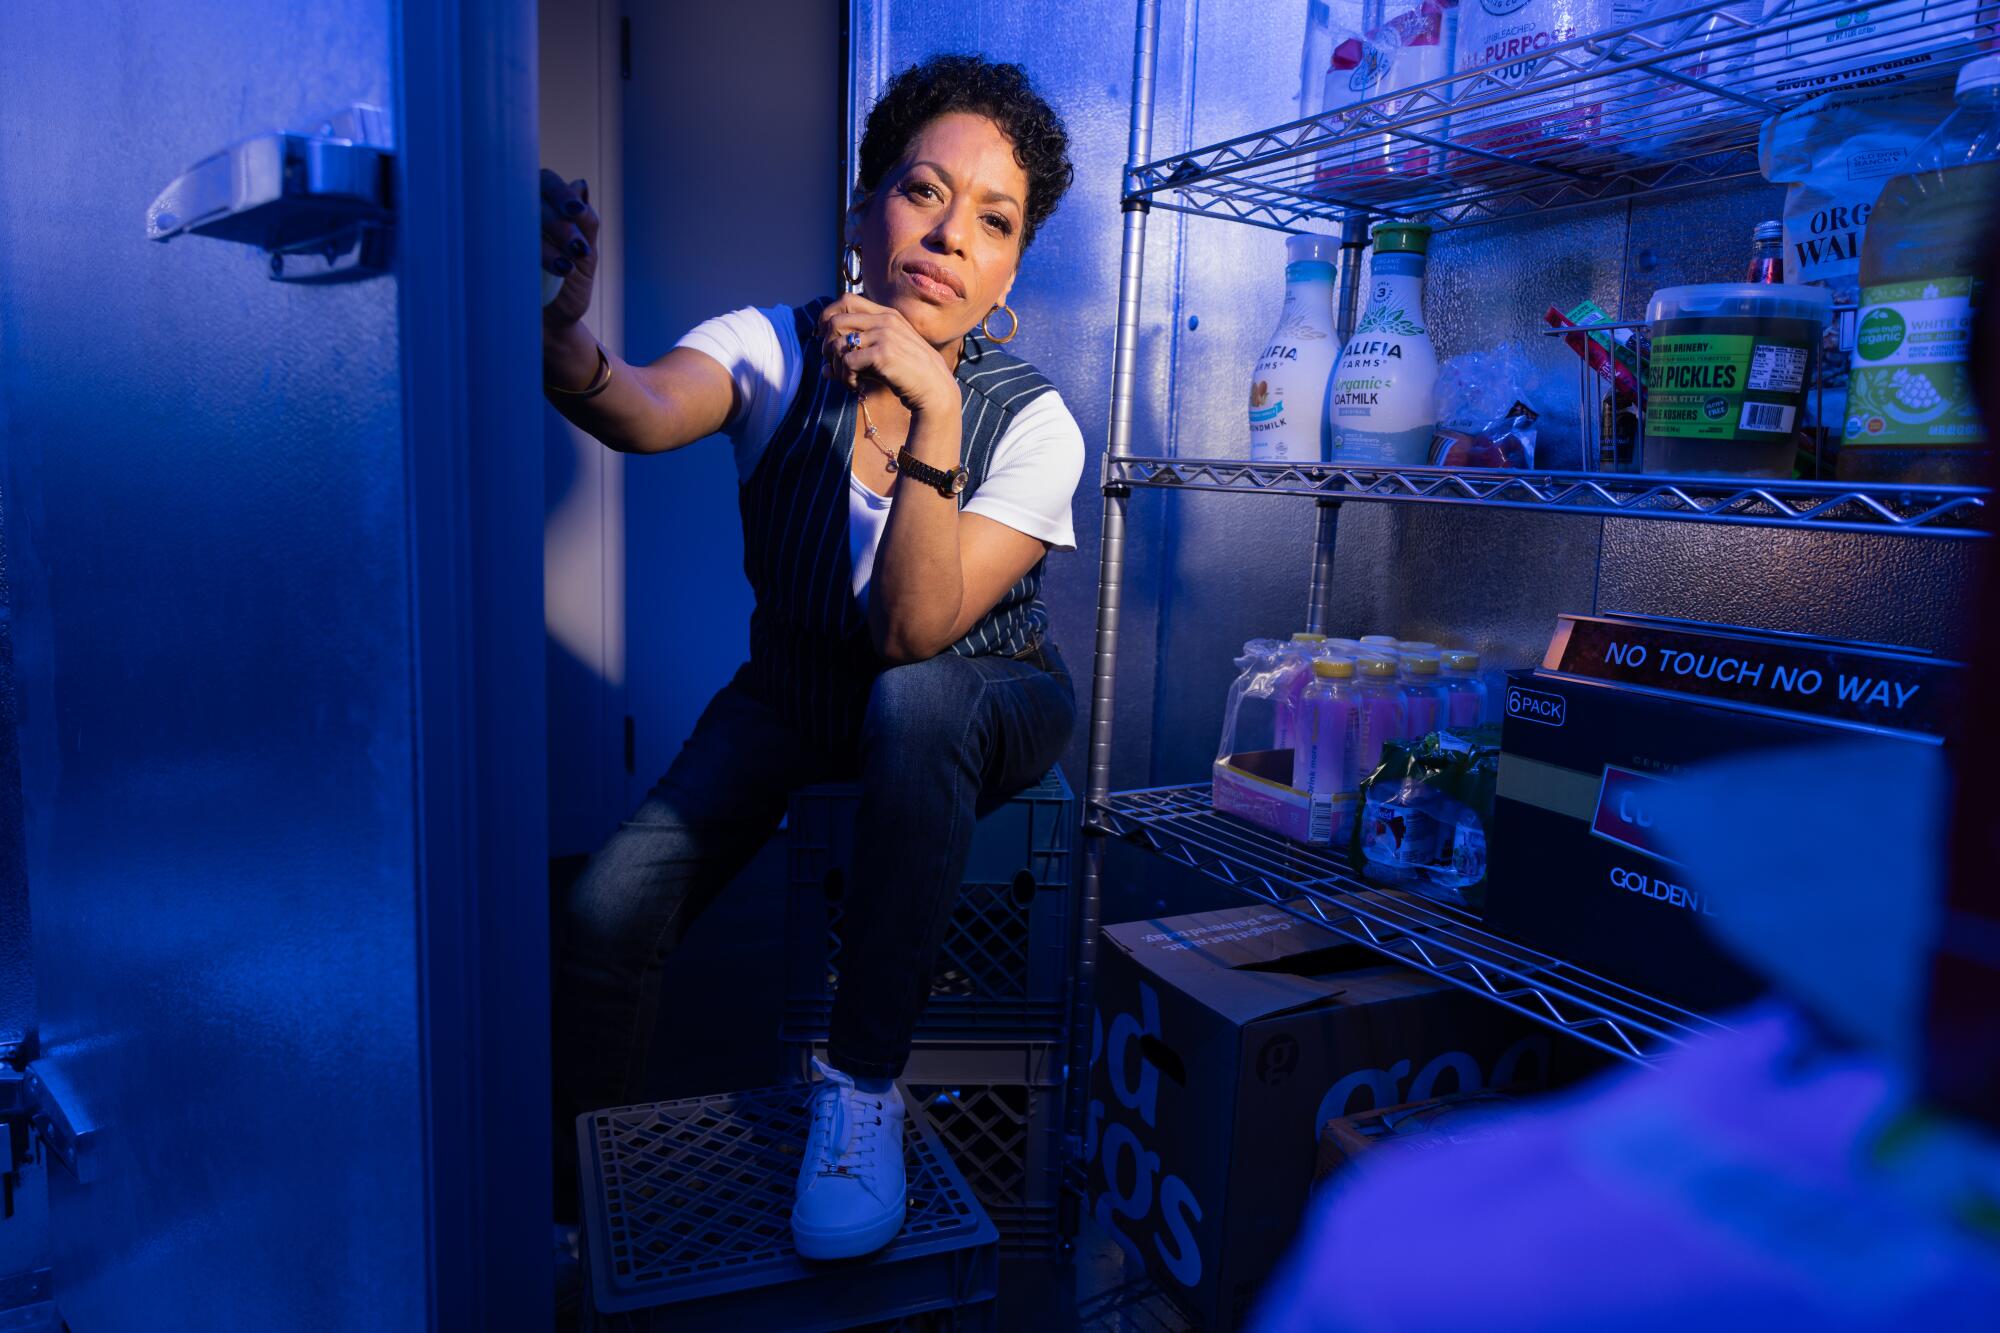 A person crouches in a restaurant supply room lit with blue light